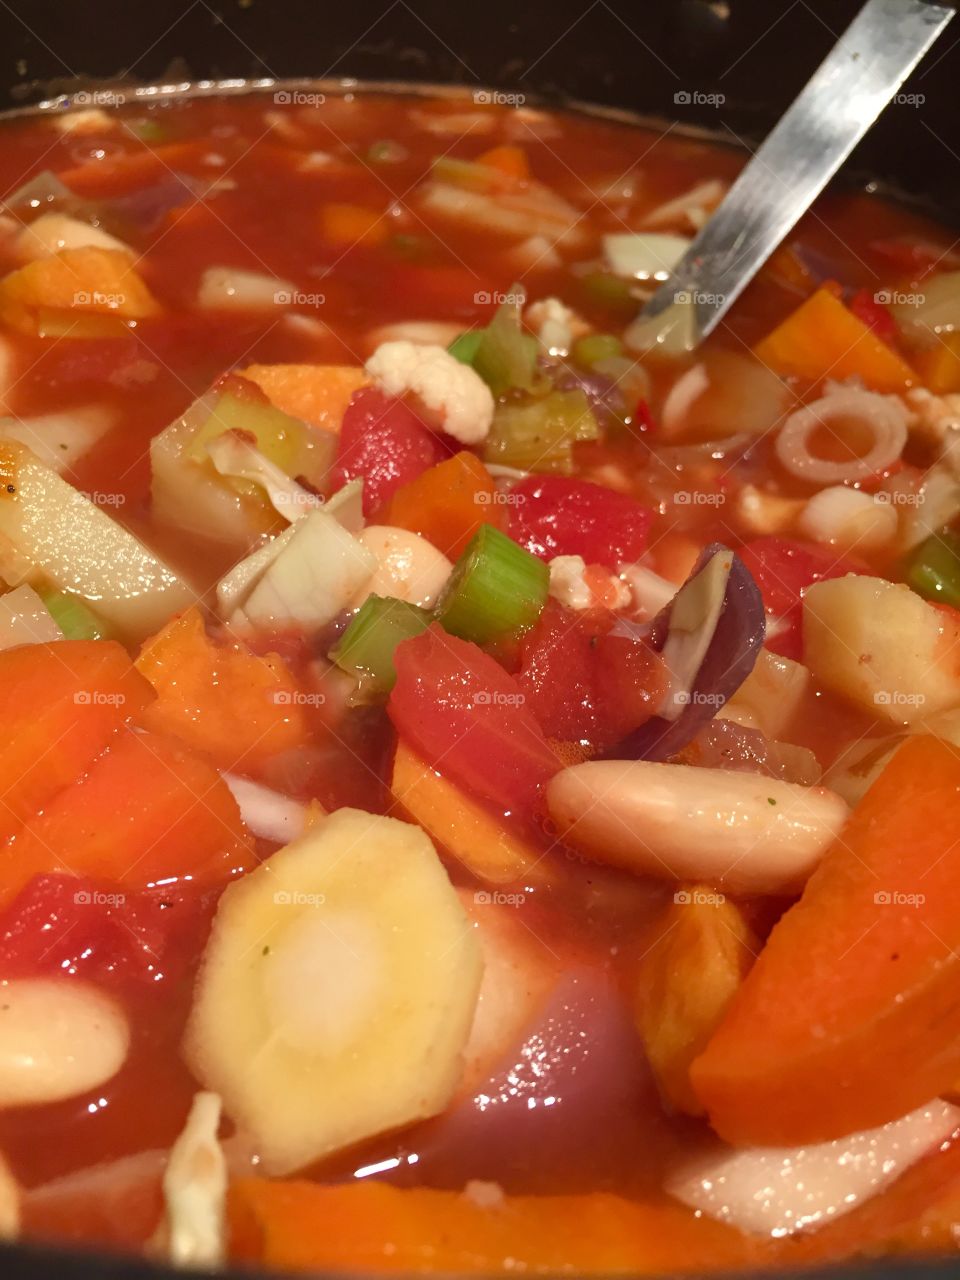 Homemade Vegetable Soup, Cooking Before Blending